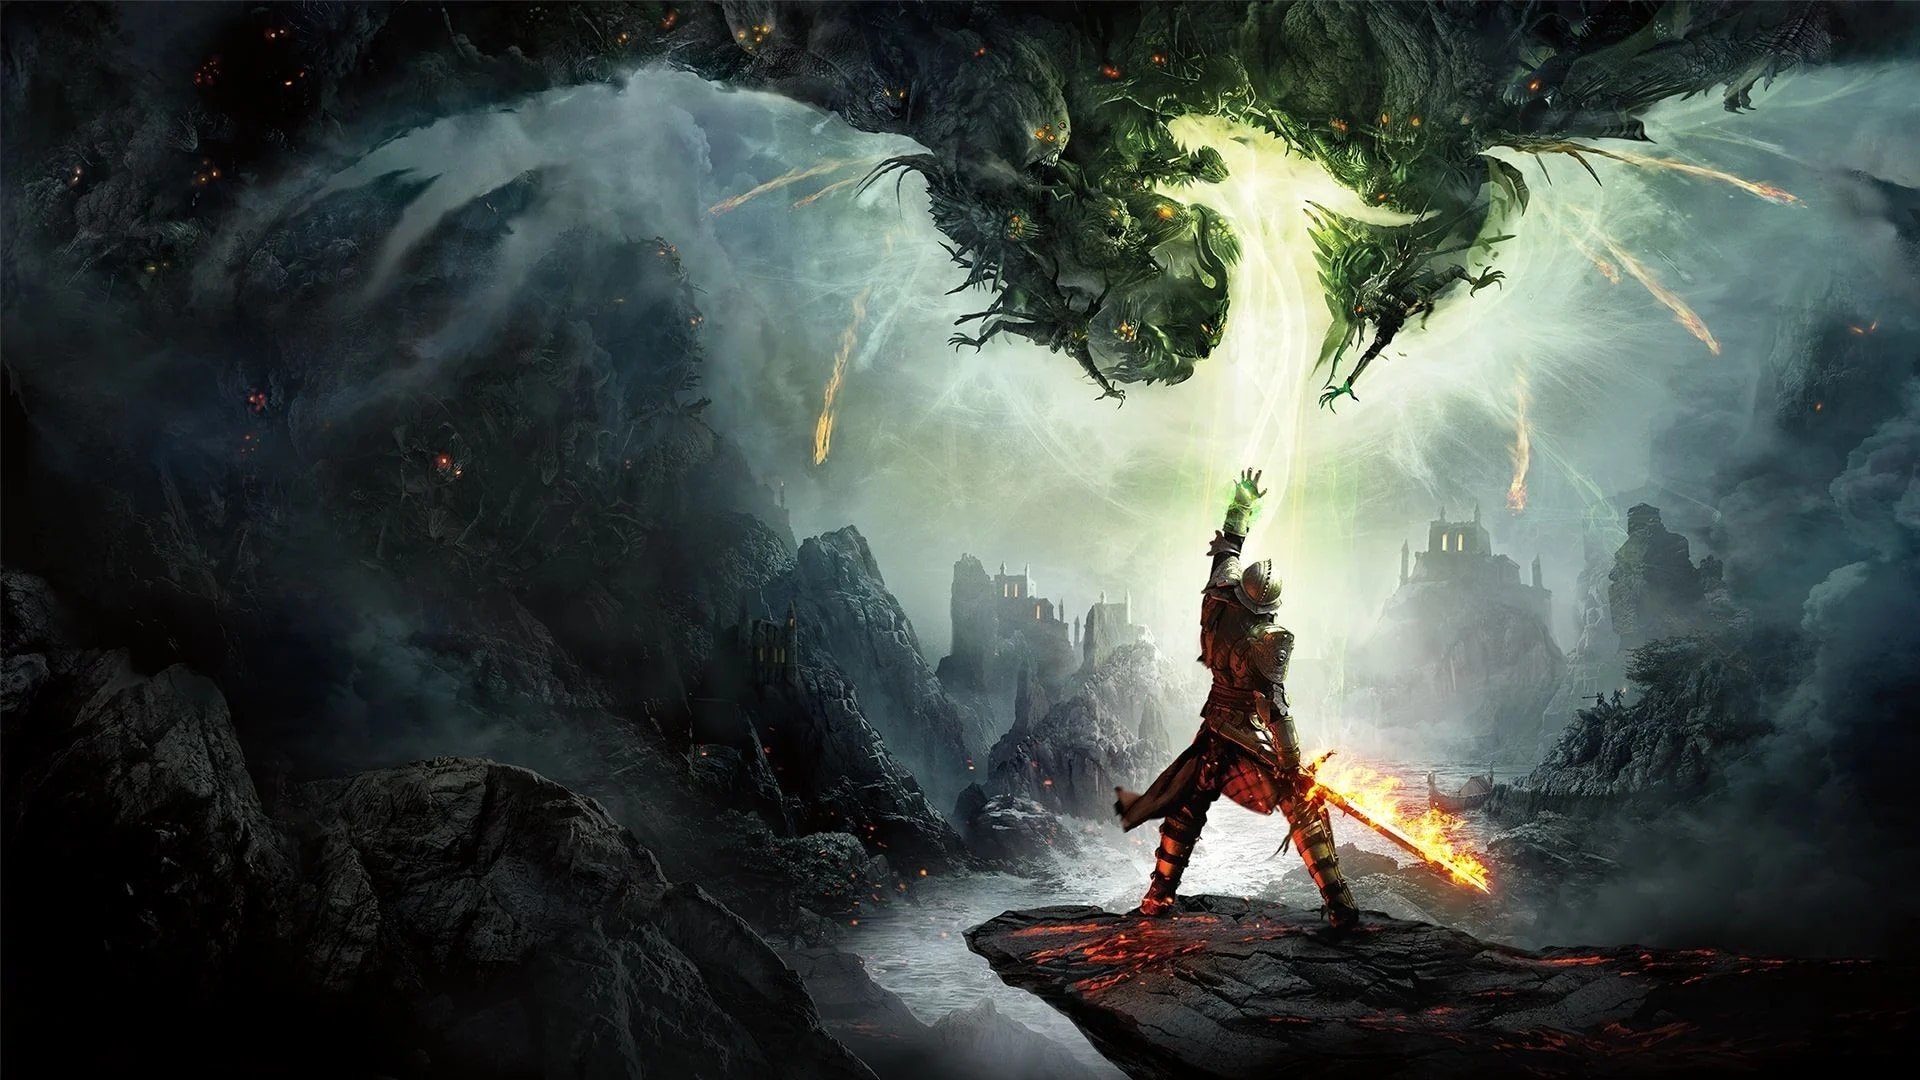 Dragon Age: Origins - Ultimate Edition Steam Charts & Stats